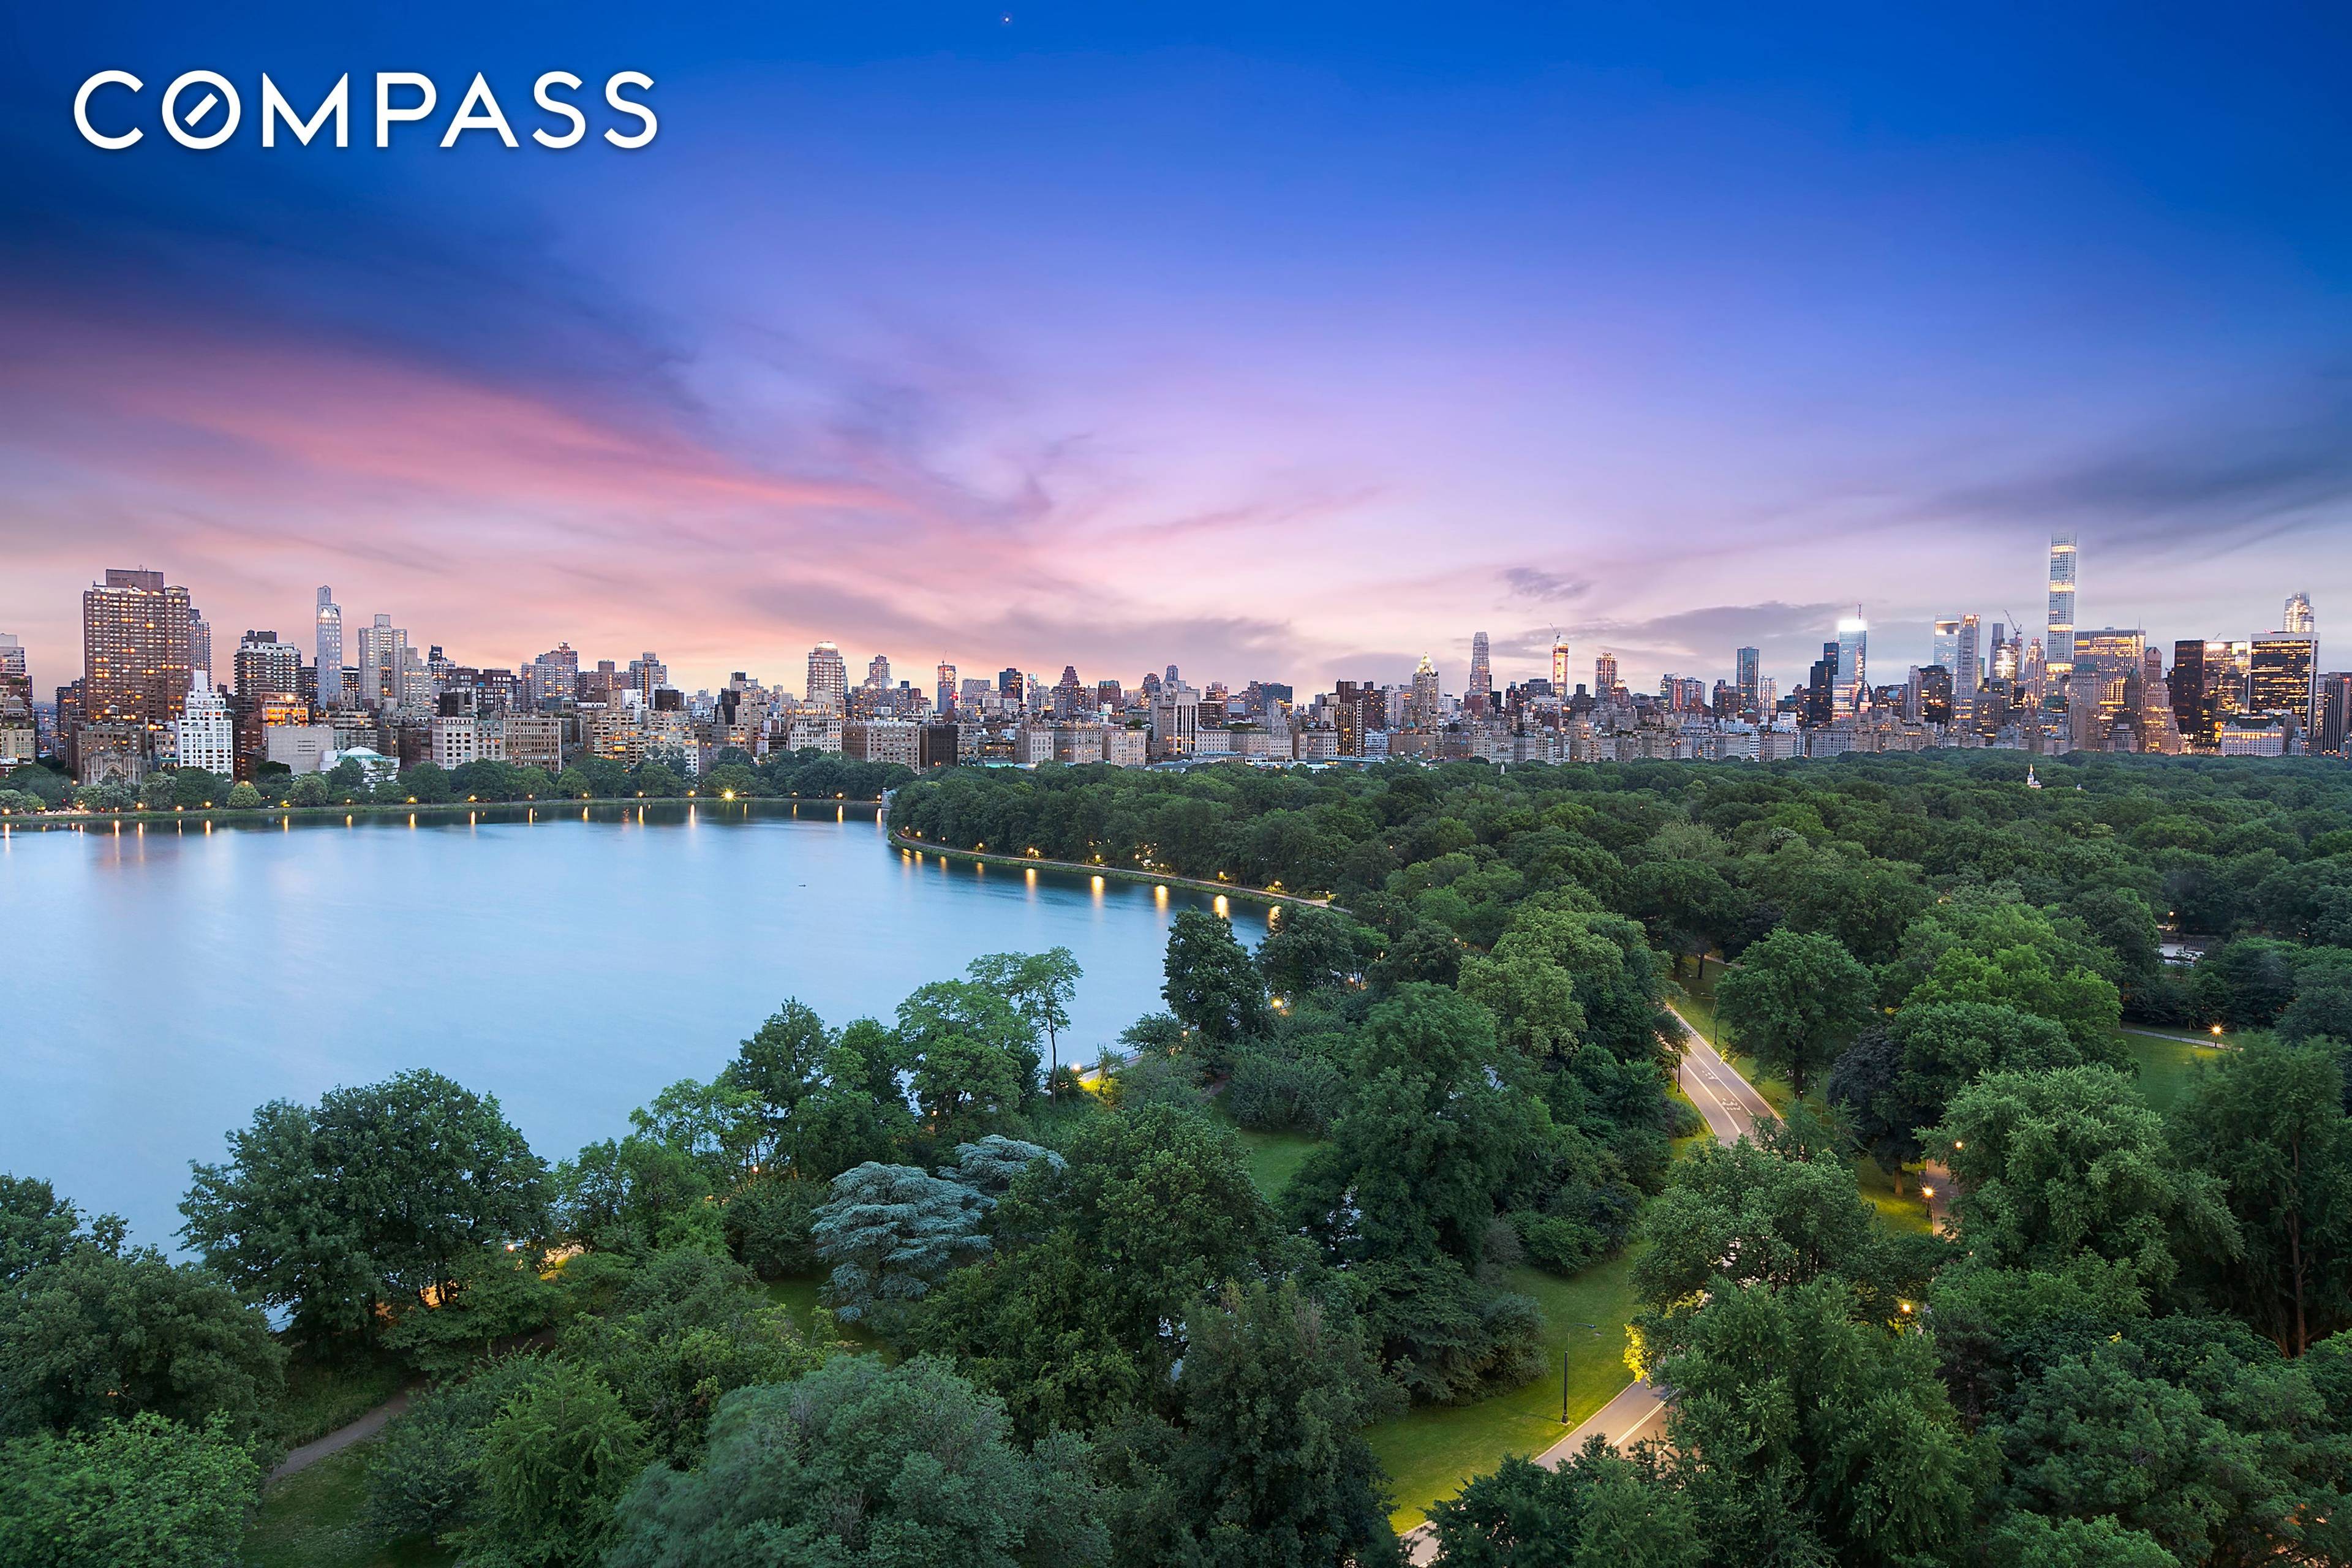 The multi faceted stature of Residence 18 19D rests in the experience of Central Park and The Reservoir, as your own private oasis of tranquility and calm against the midtown ...